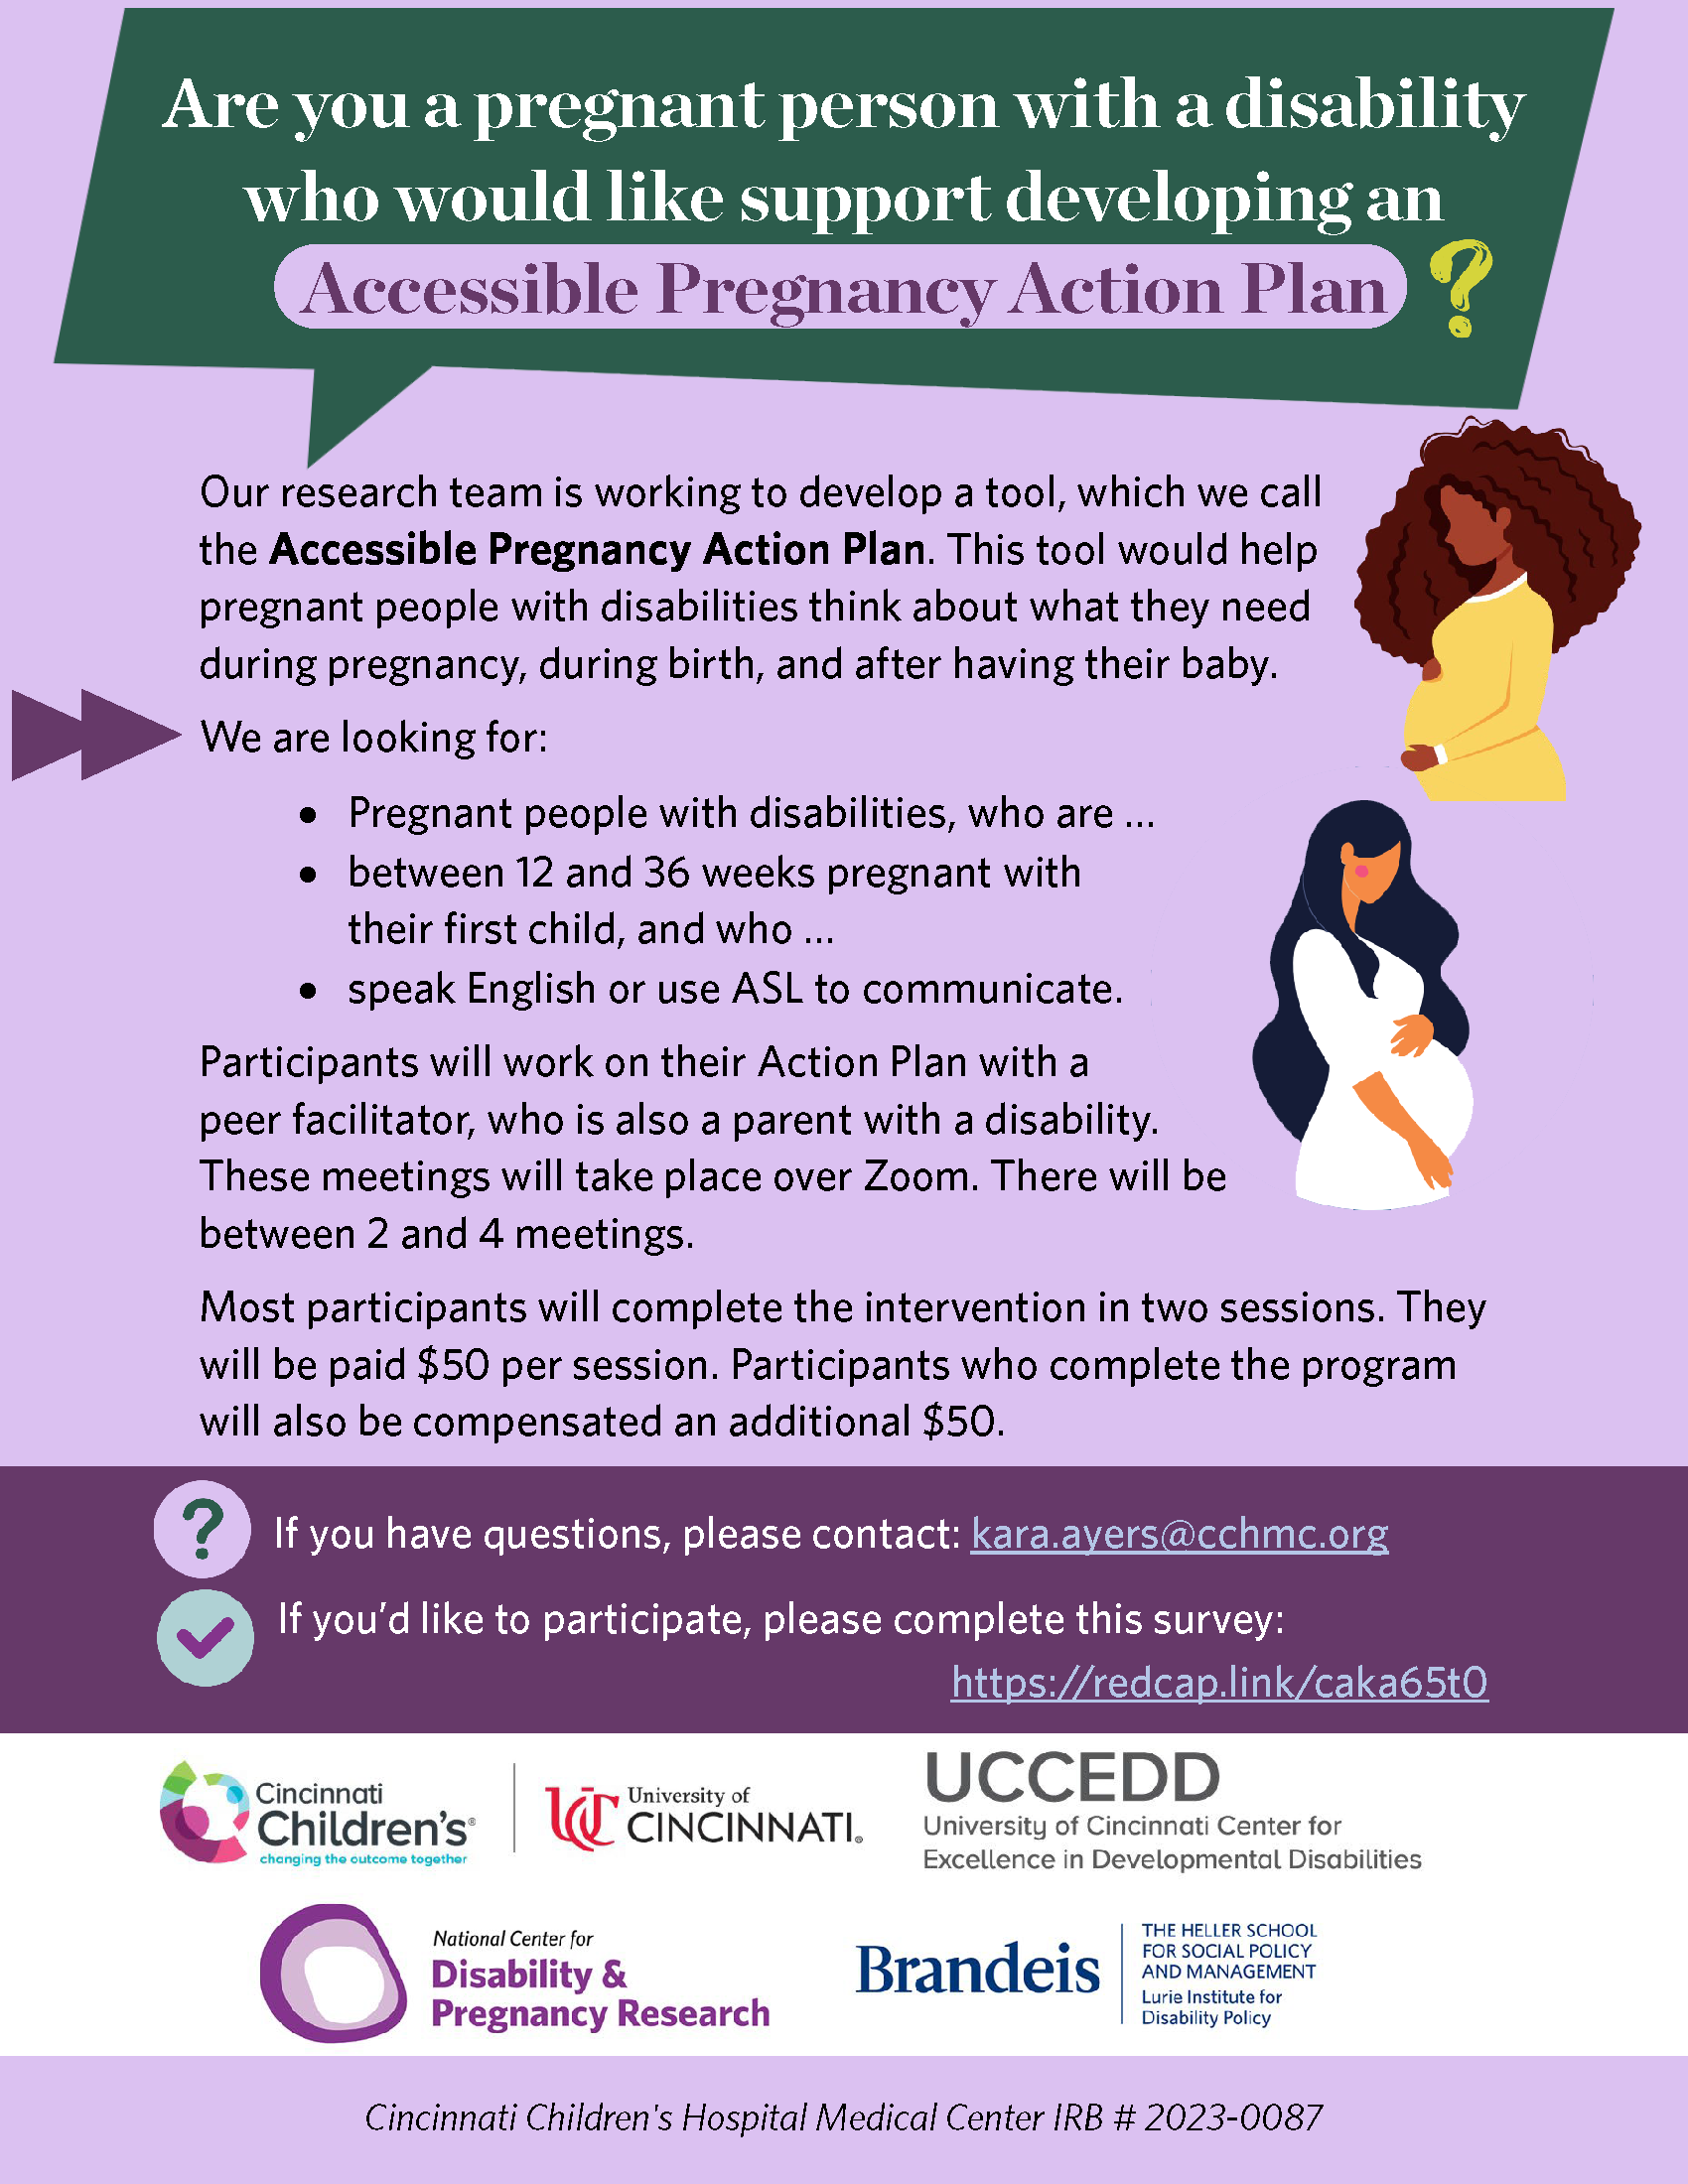 Are you a pregnant person with a disability who would like support developing an Accessible Pregnancy Action Plan?